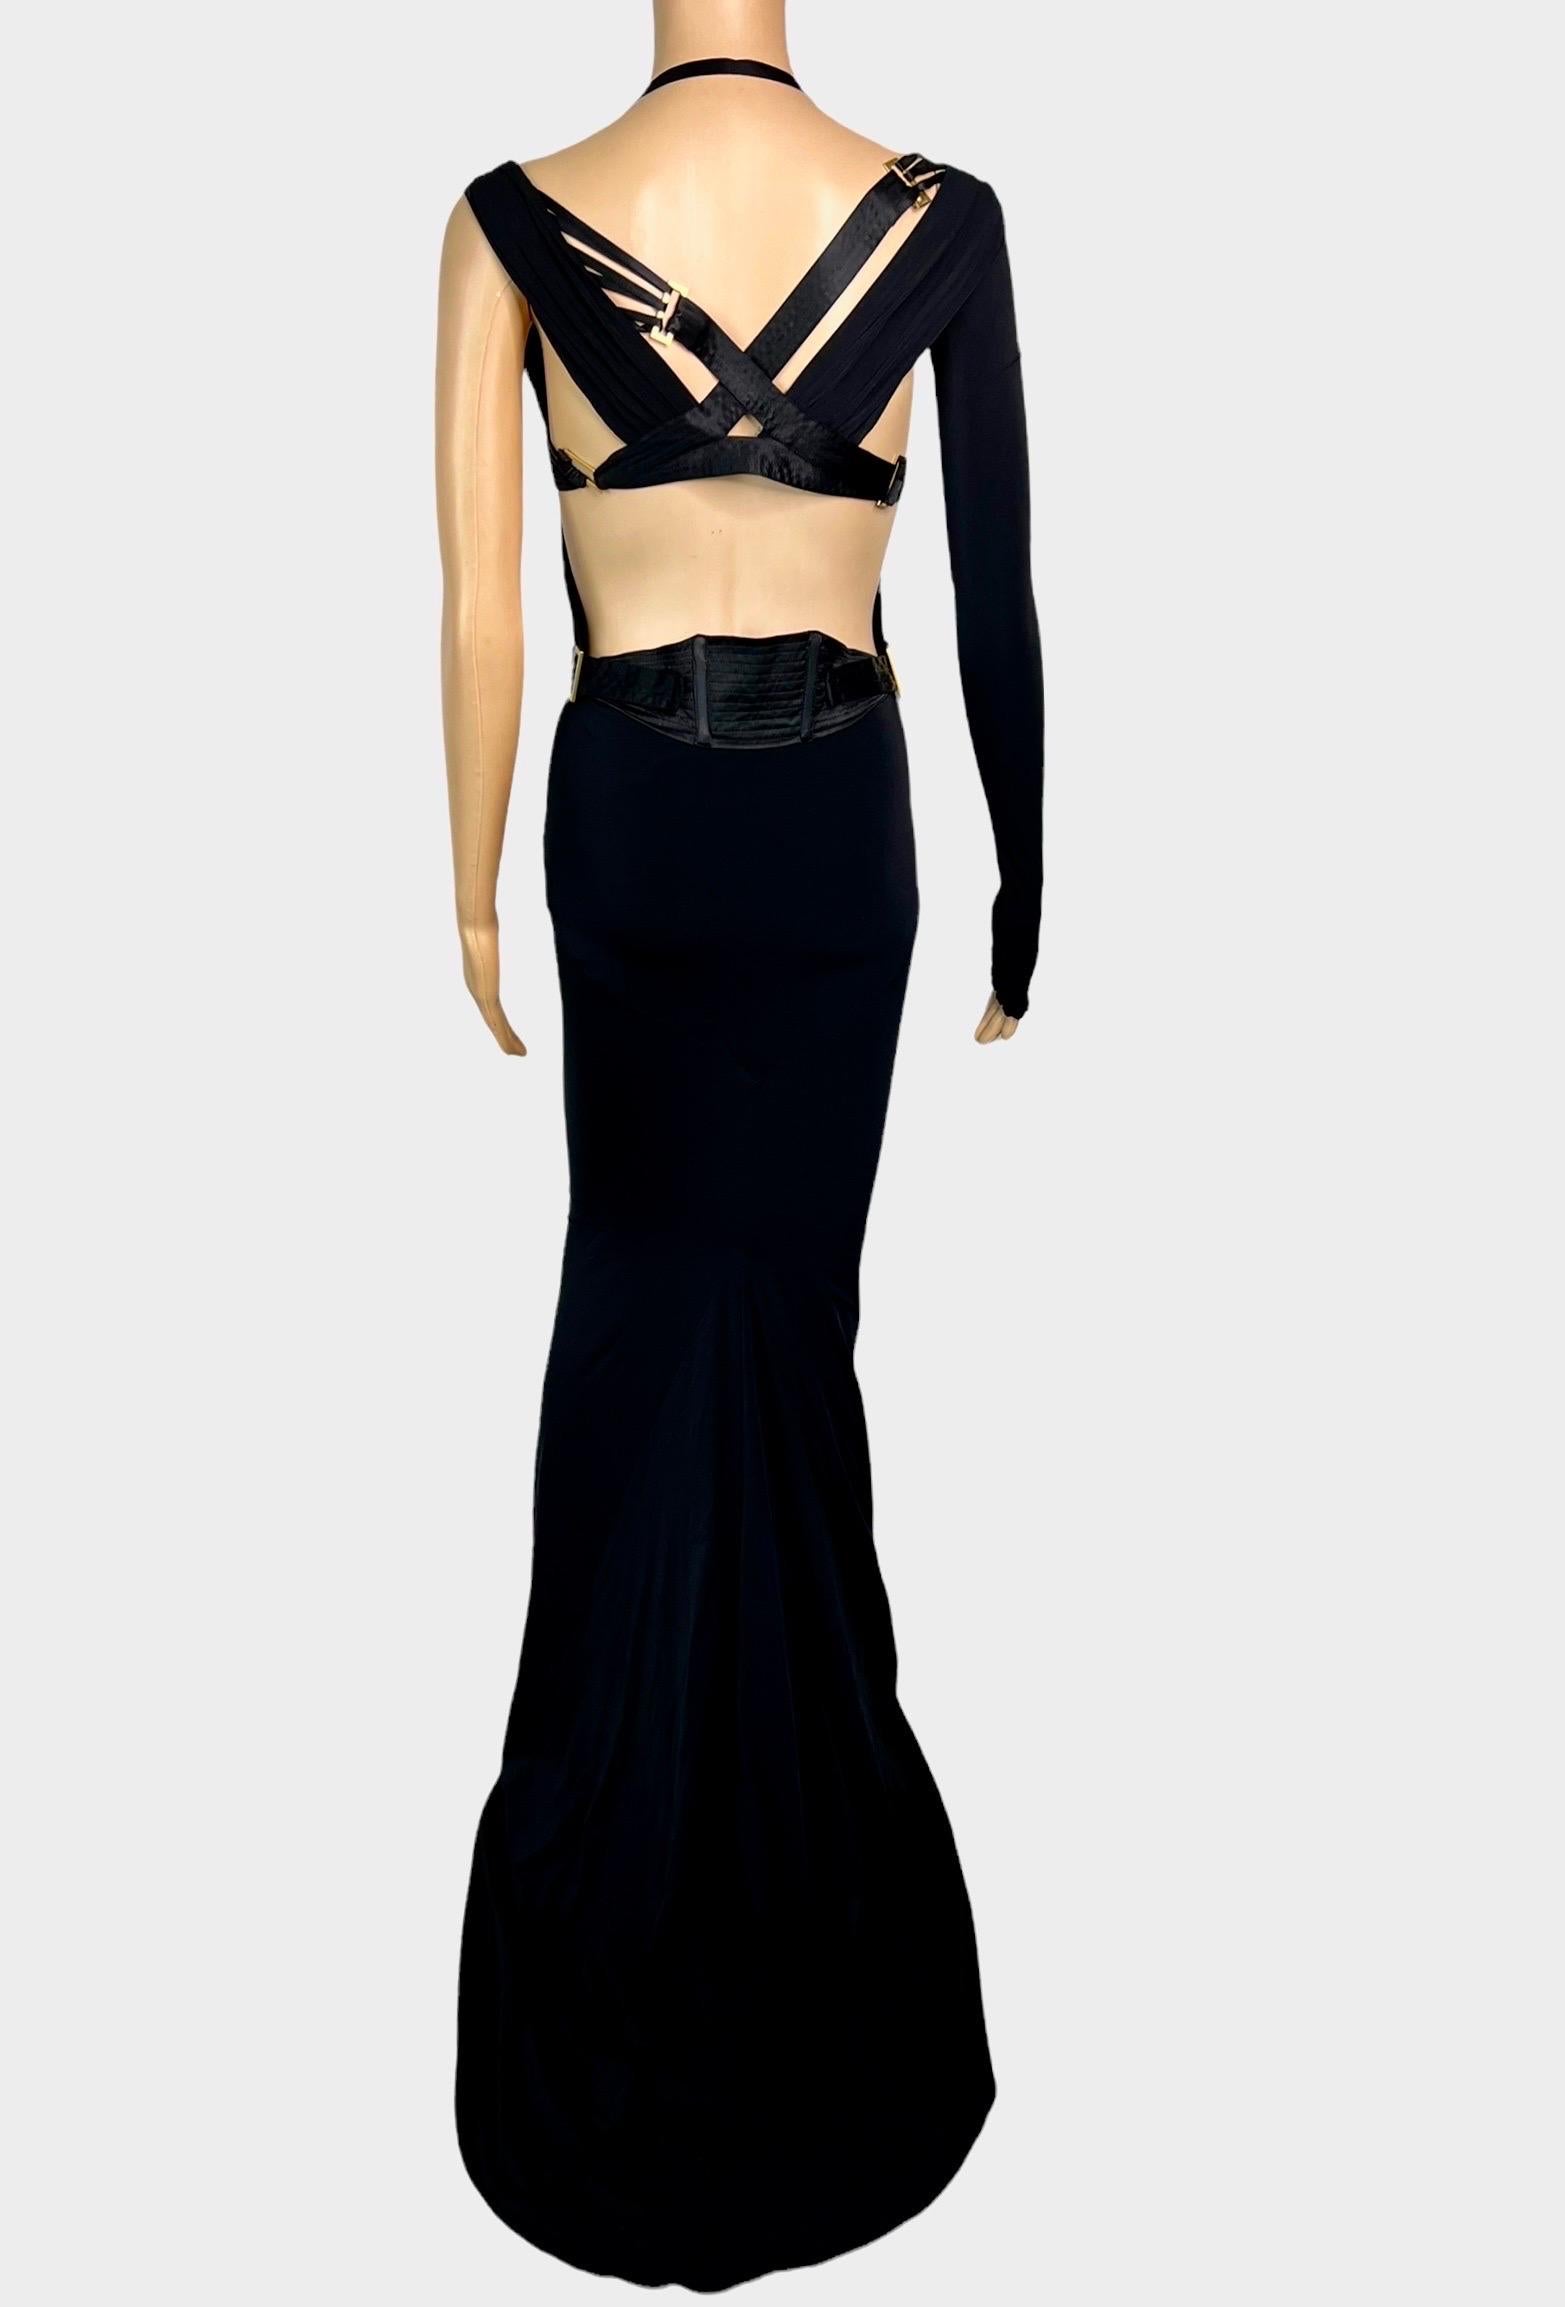 Tom Ford for Gucci F/W 2003 Bustier Corset Cutout Train Black Evening Dress Gown 7